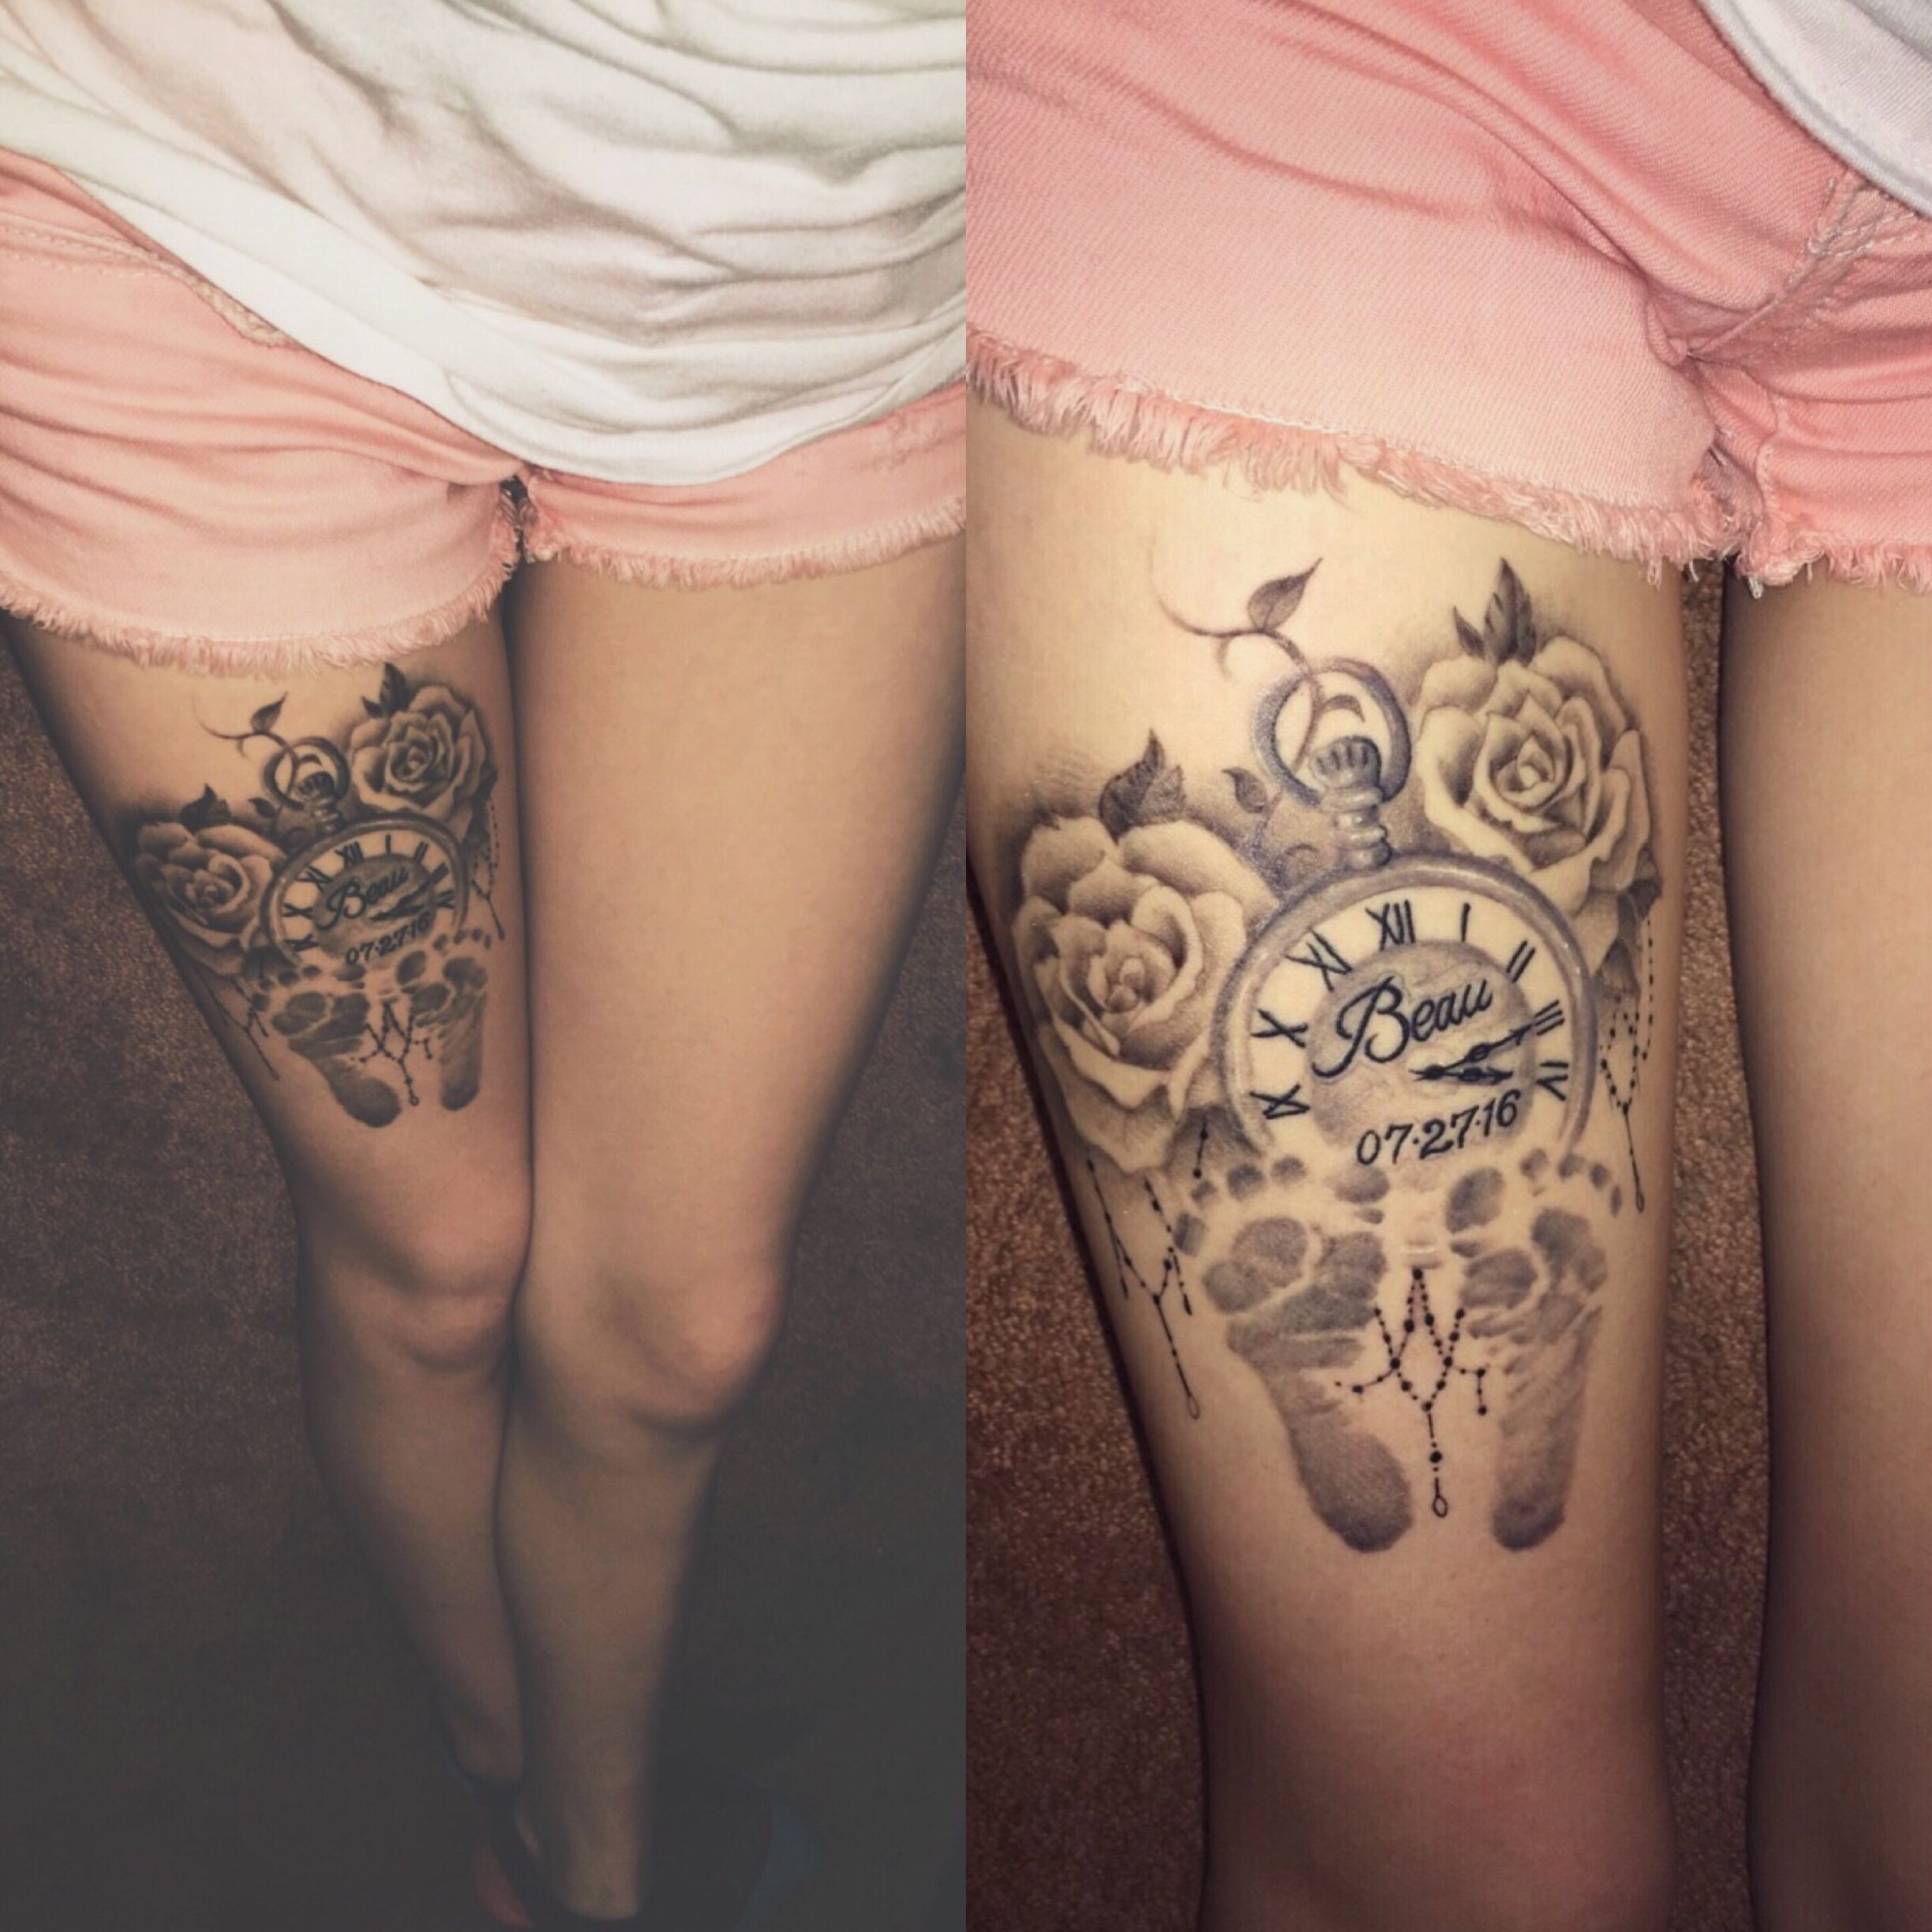 Roses, pocket-watch and baby footprints tattoo